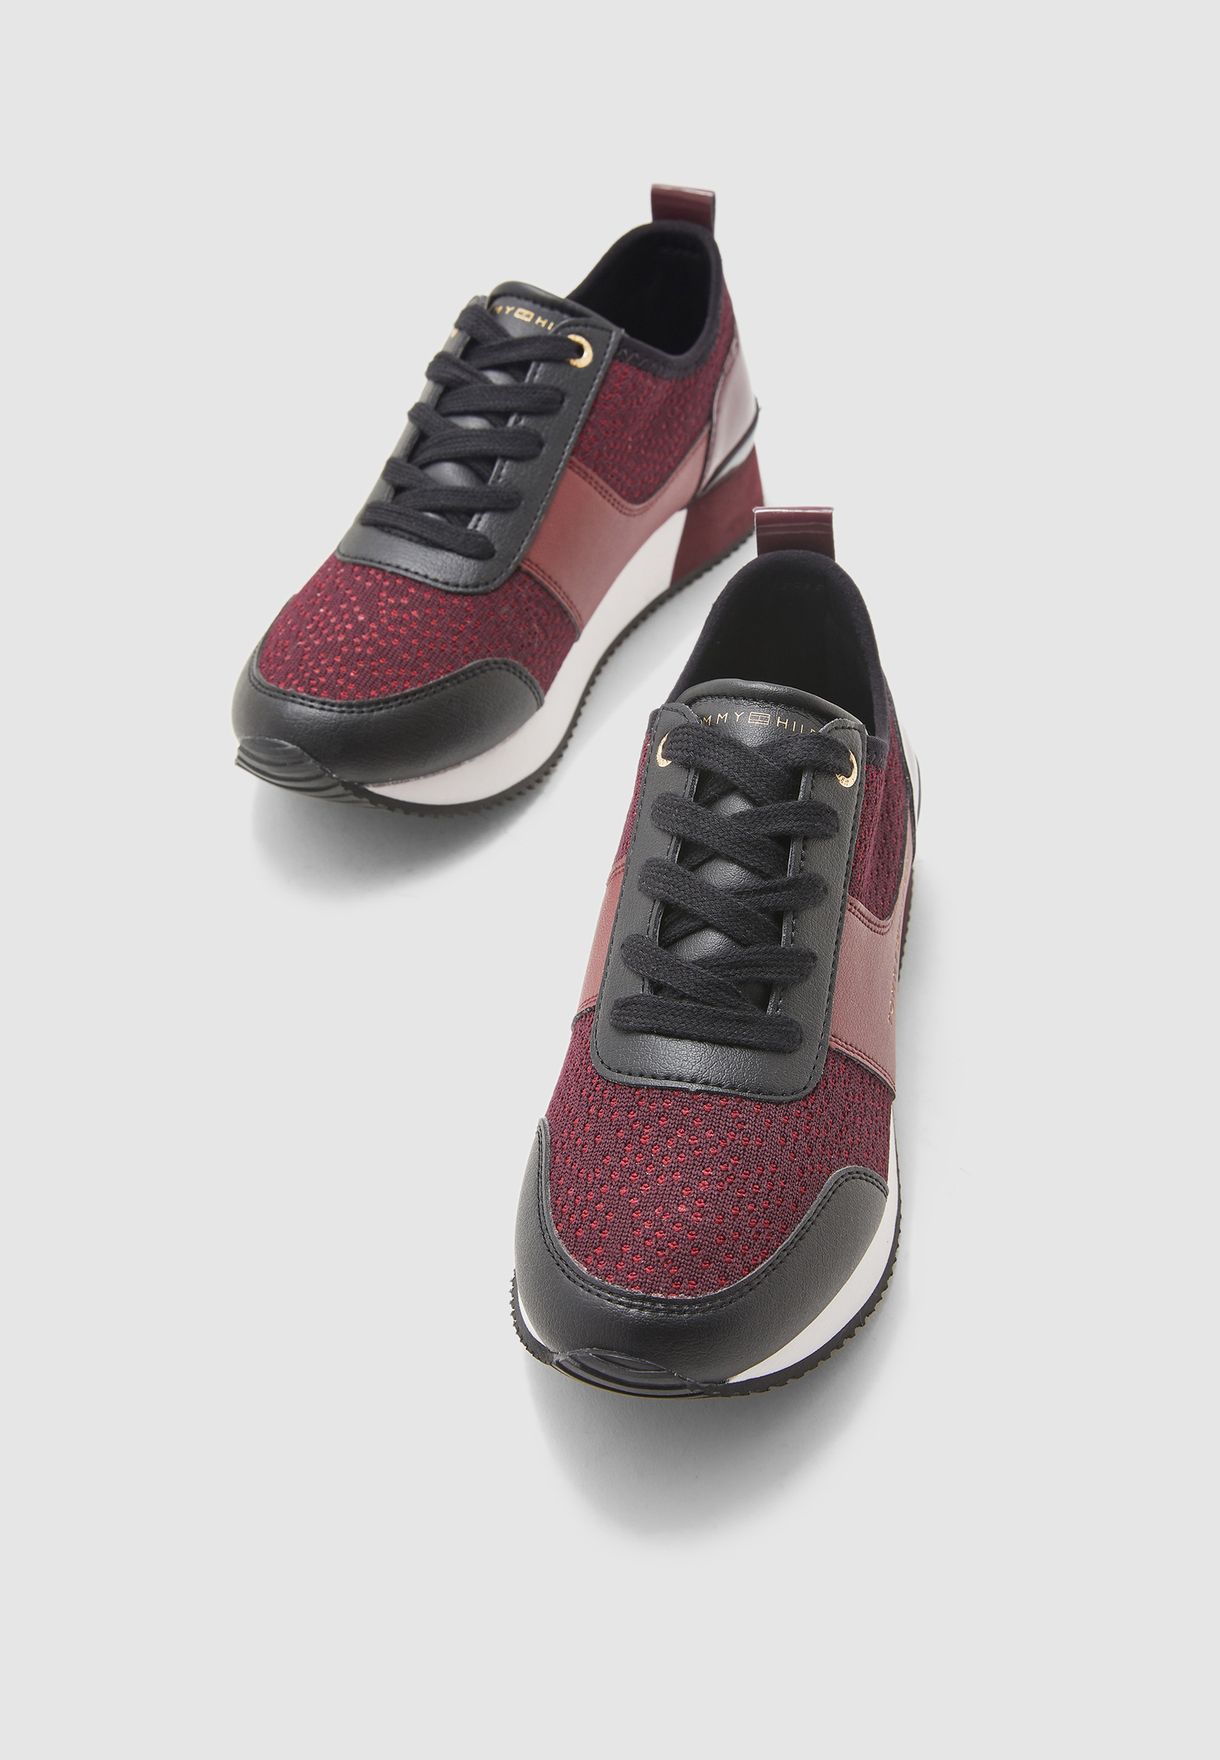 tommy hilfiger maroon shoes